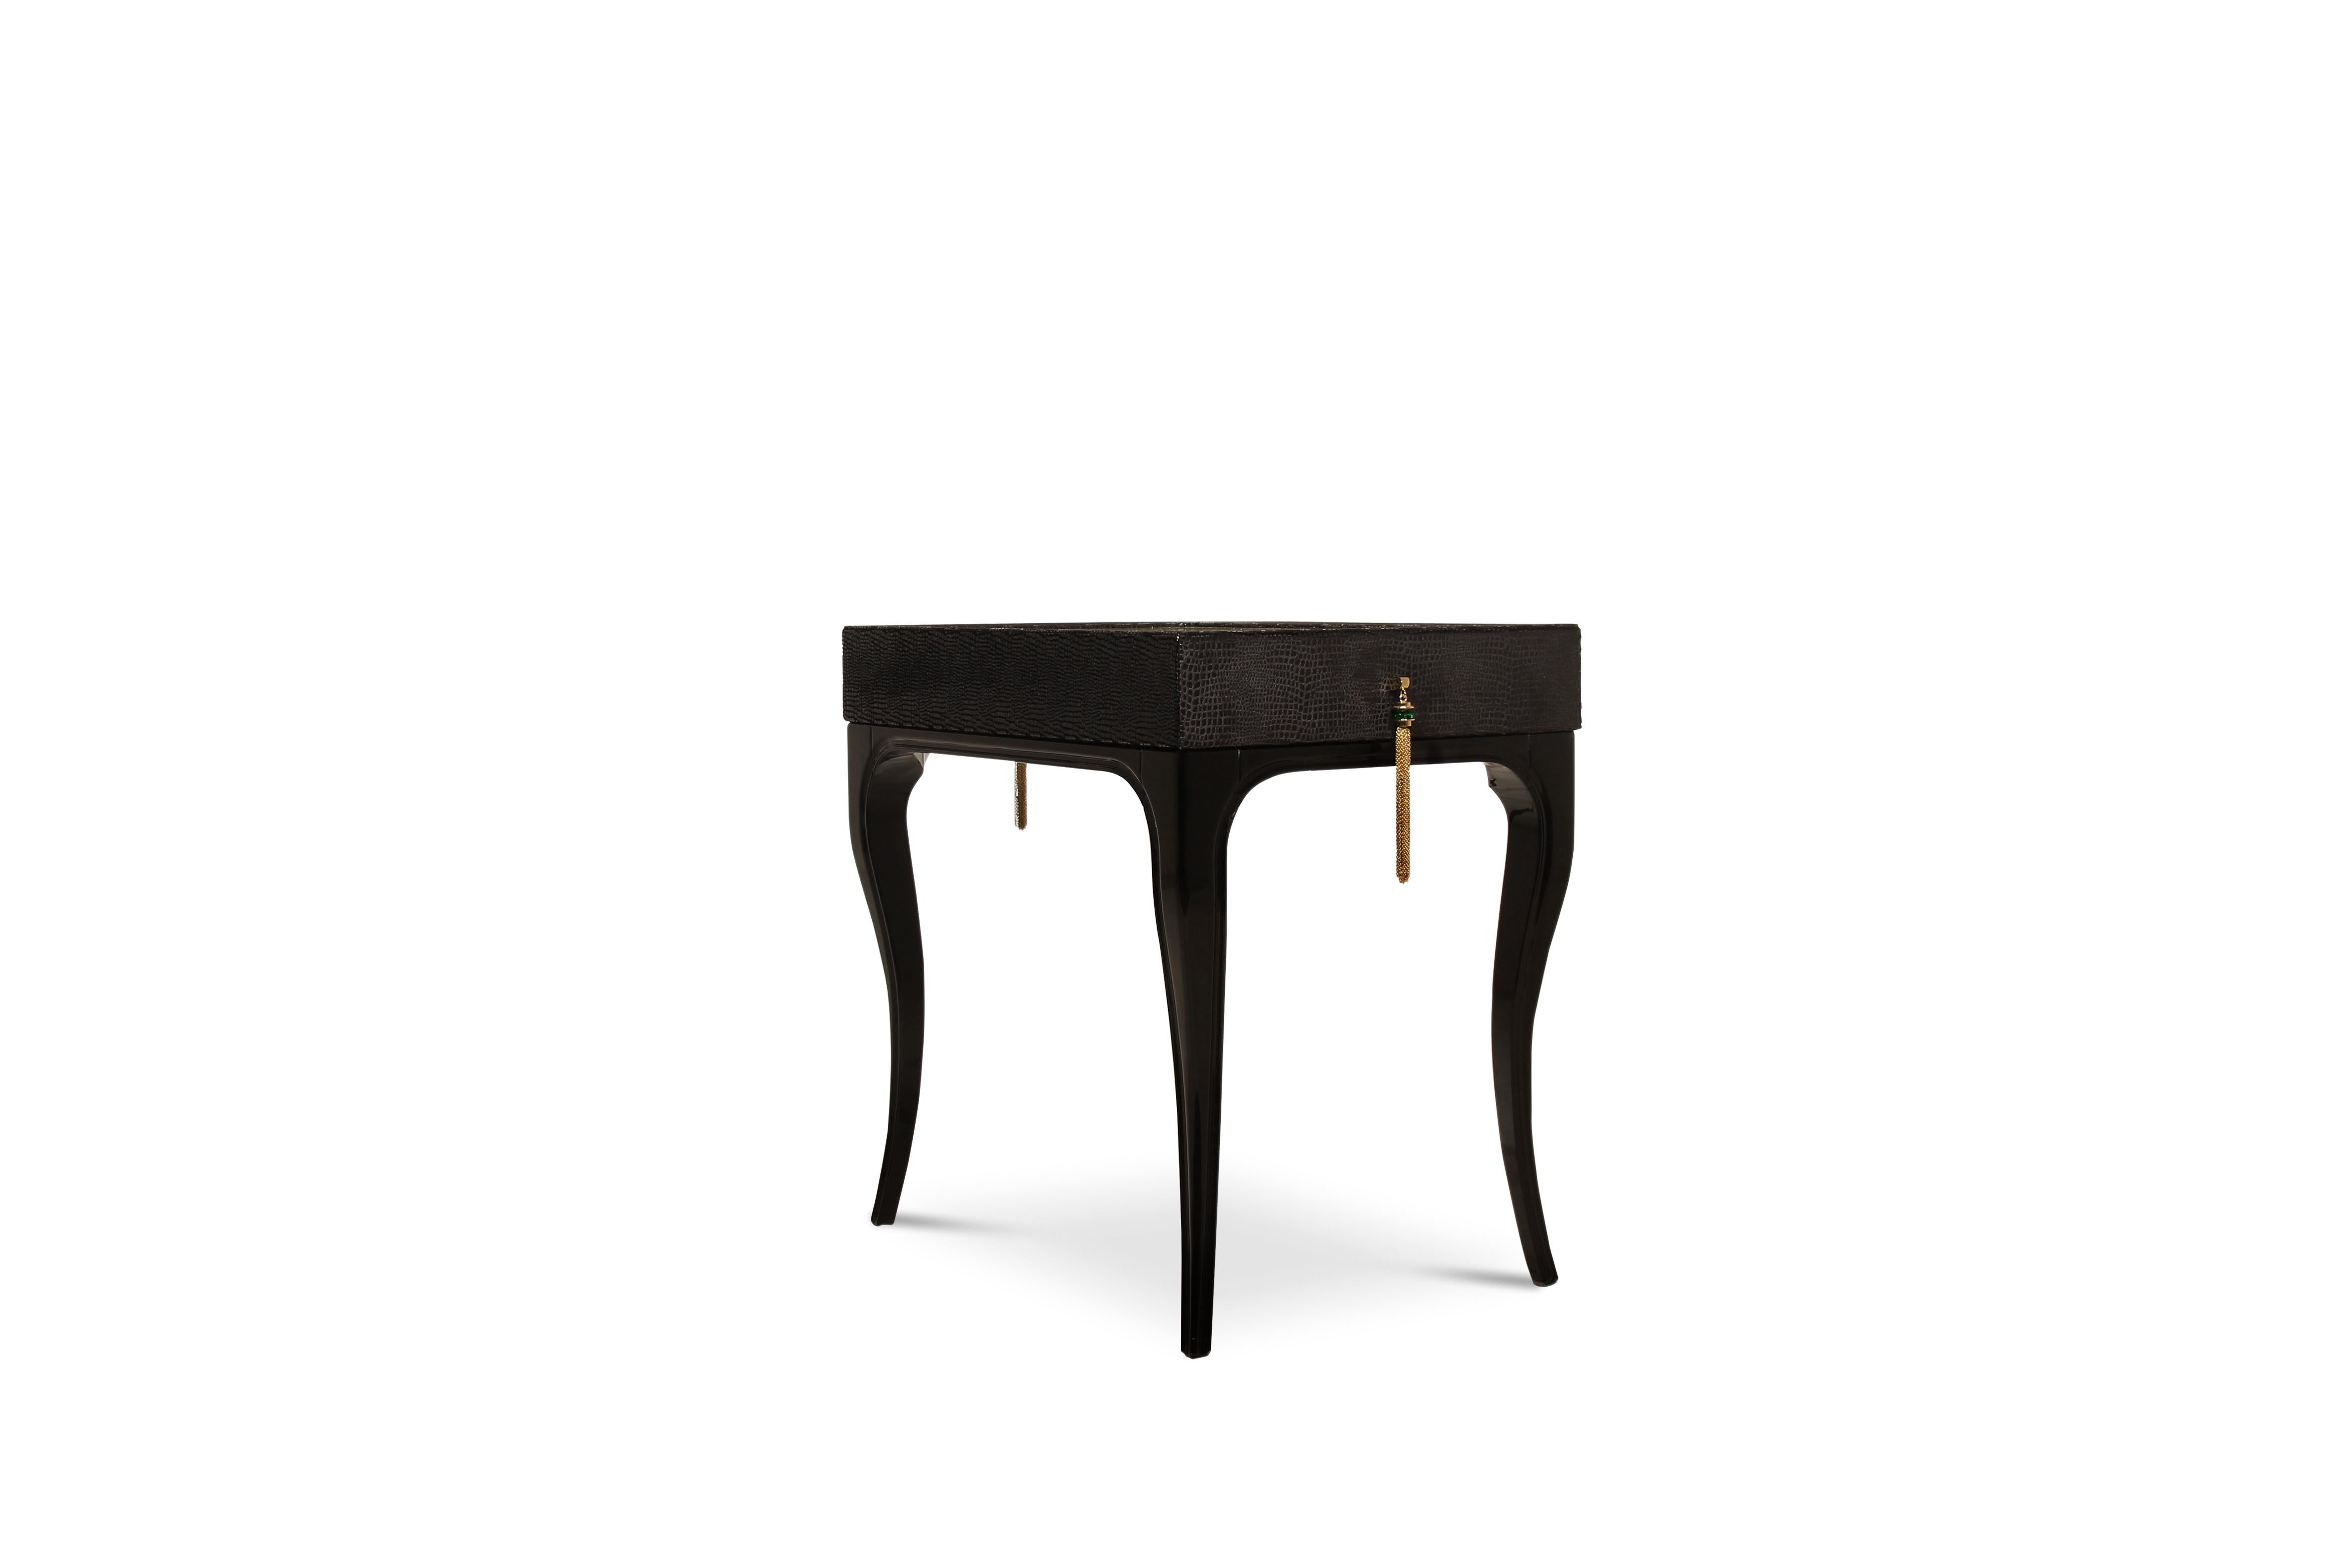 Exuding feelings of fantasy, this highly coveted nightstand is bold, daring and seductive. Her wooden frame is cloaked in an exotic fabric with a complementing metal top, juxtaposed with the mesmerizing movements of shimmering glass tassels.

Top: